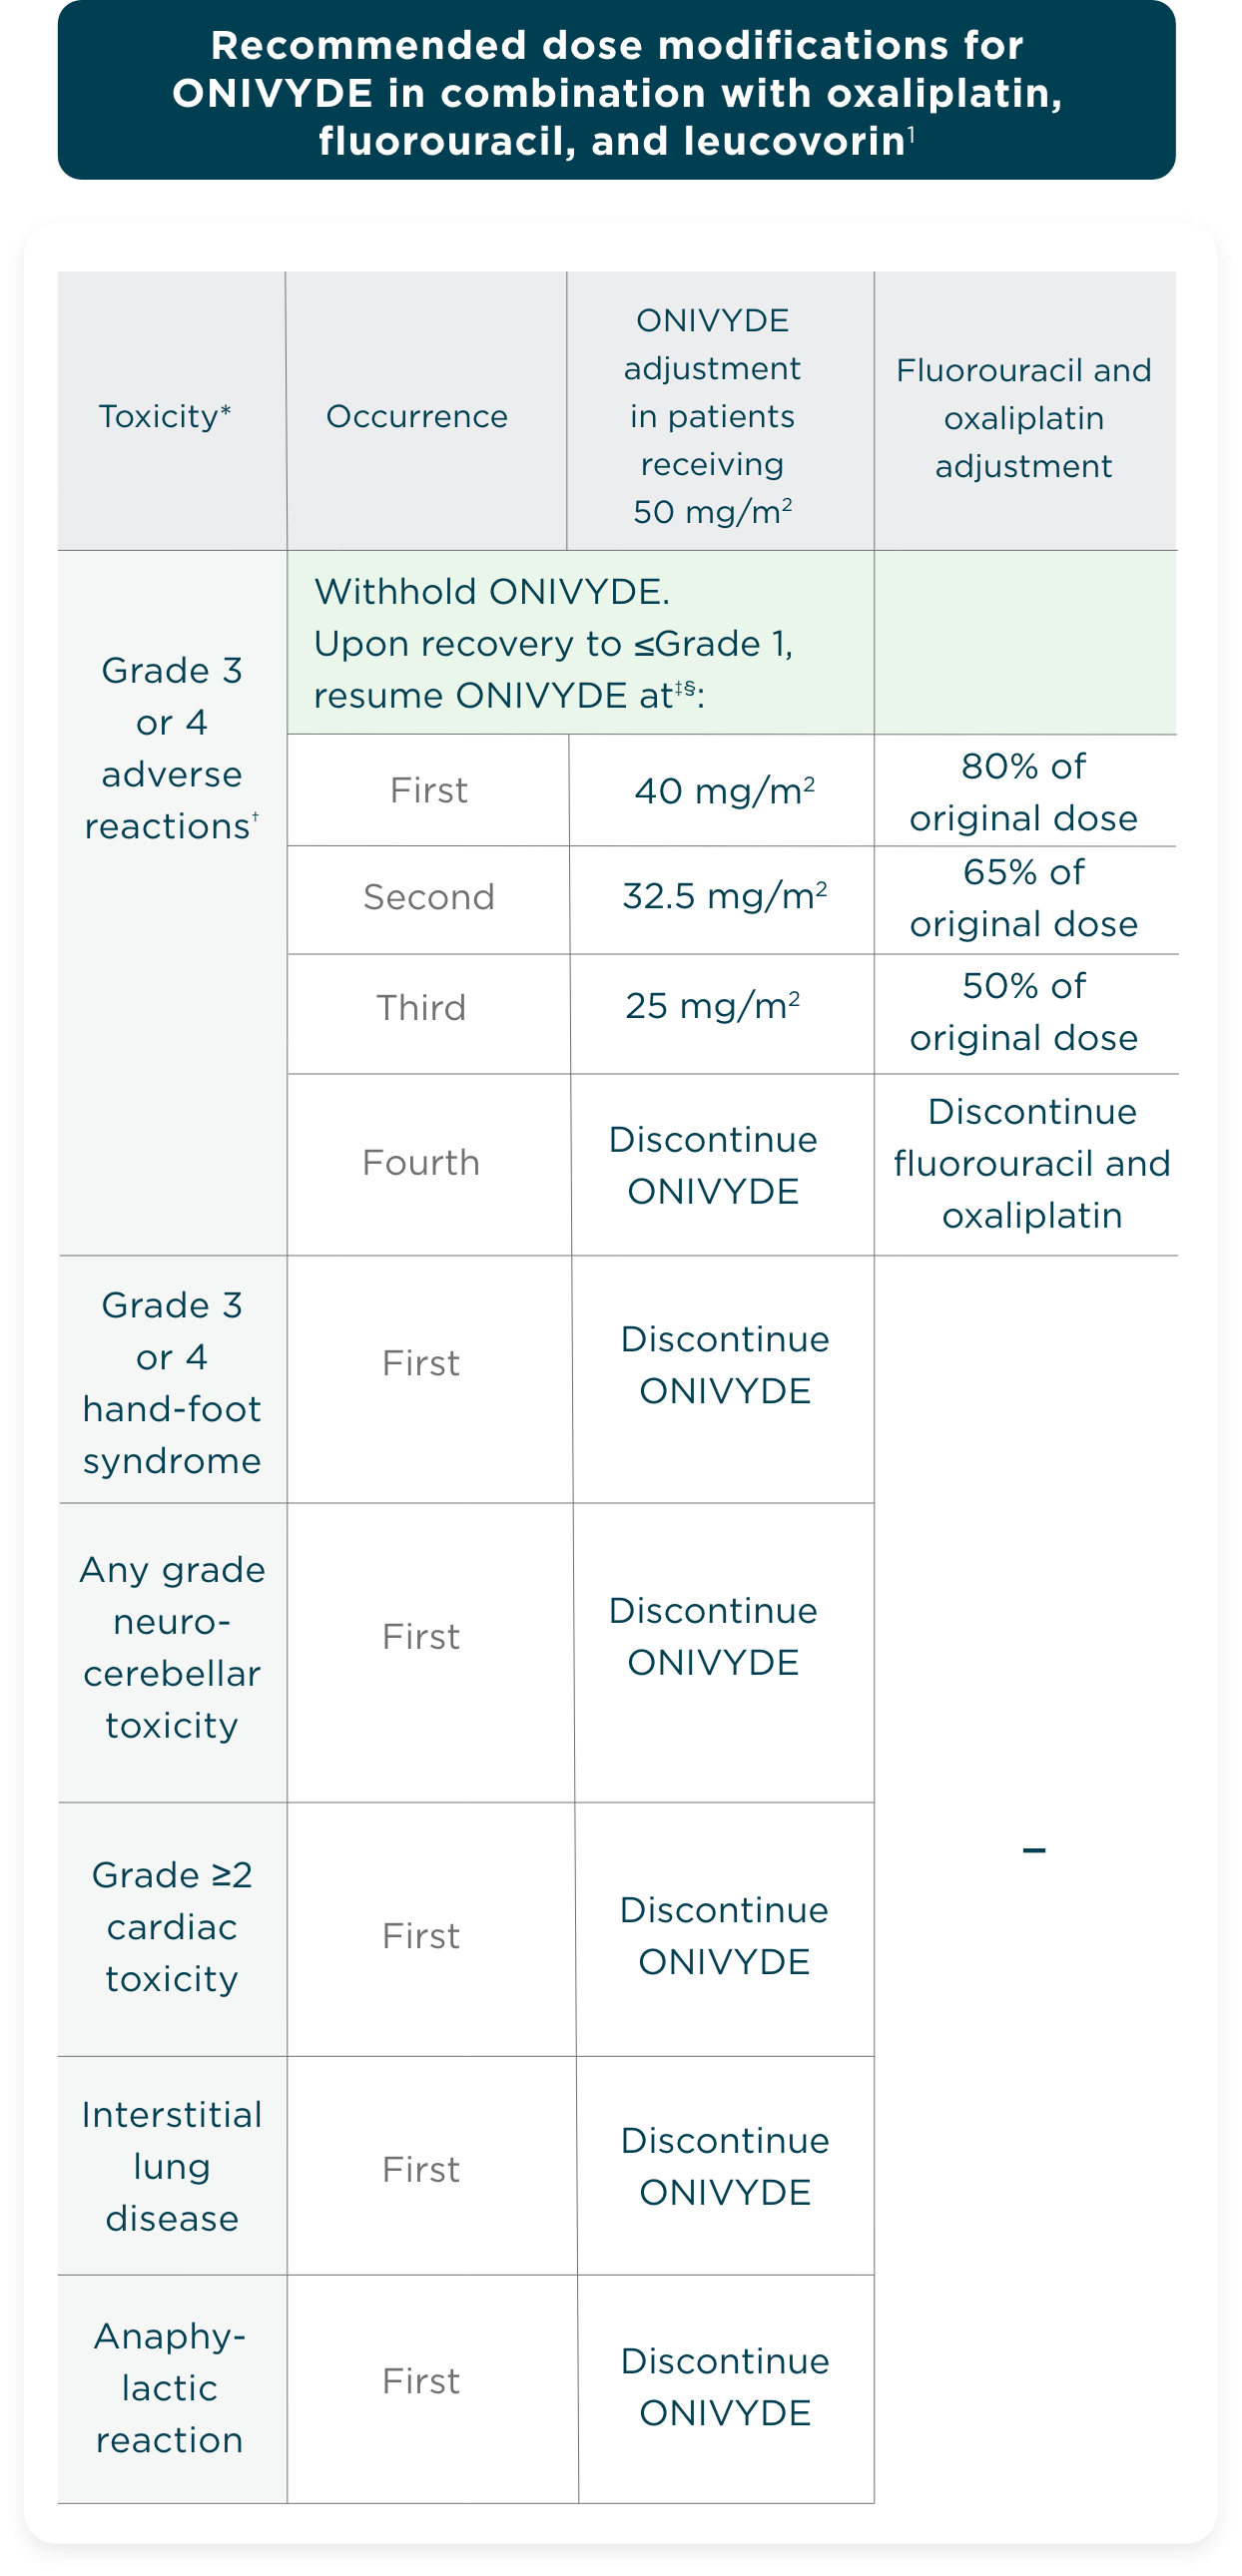 Recommended modifications from the NAPOLI 3 clinical trial of ONIVYDE® (irinotecan liposome injection) + oxaliplatin + FU/LV, including dose reduction, delay, and discontinuation.